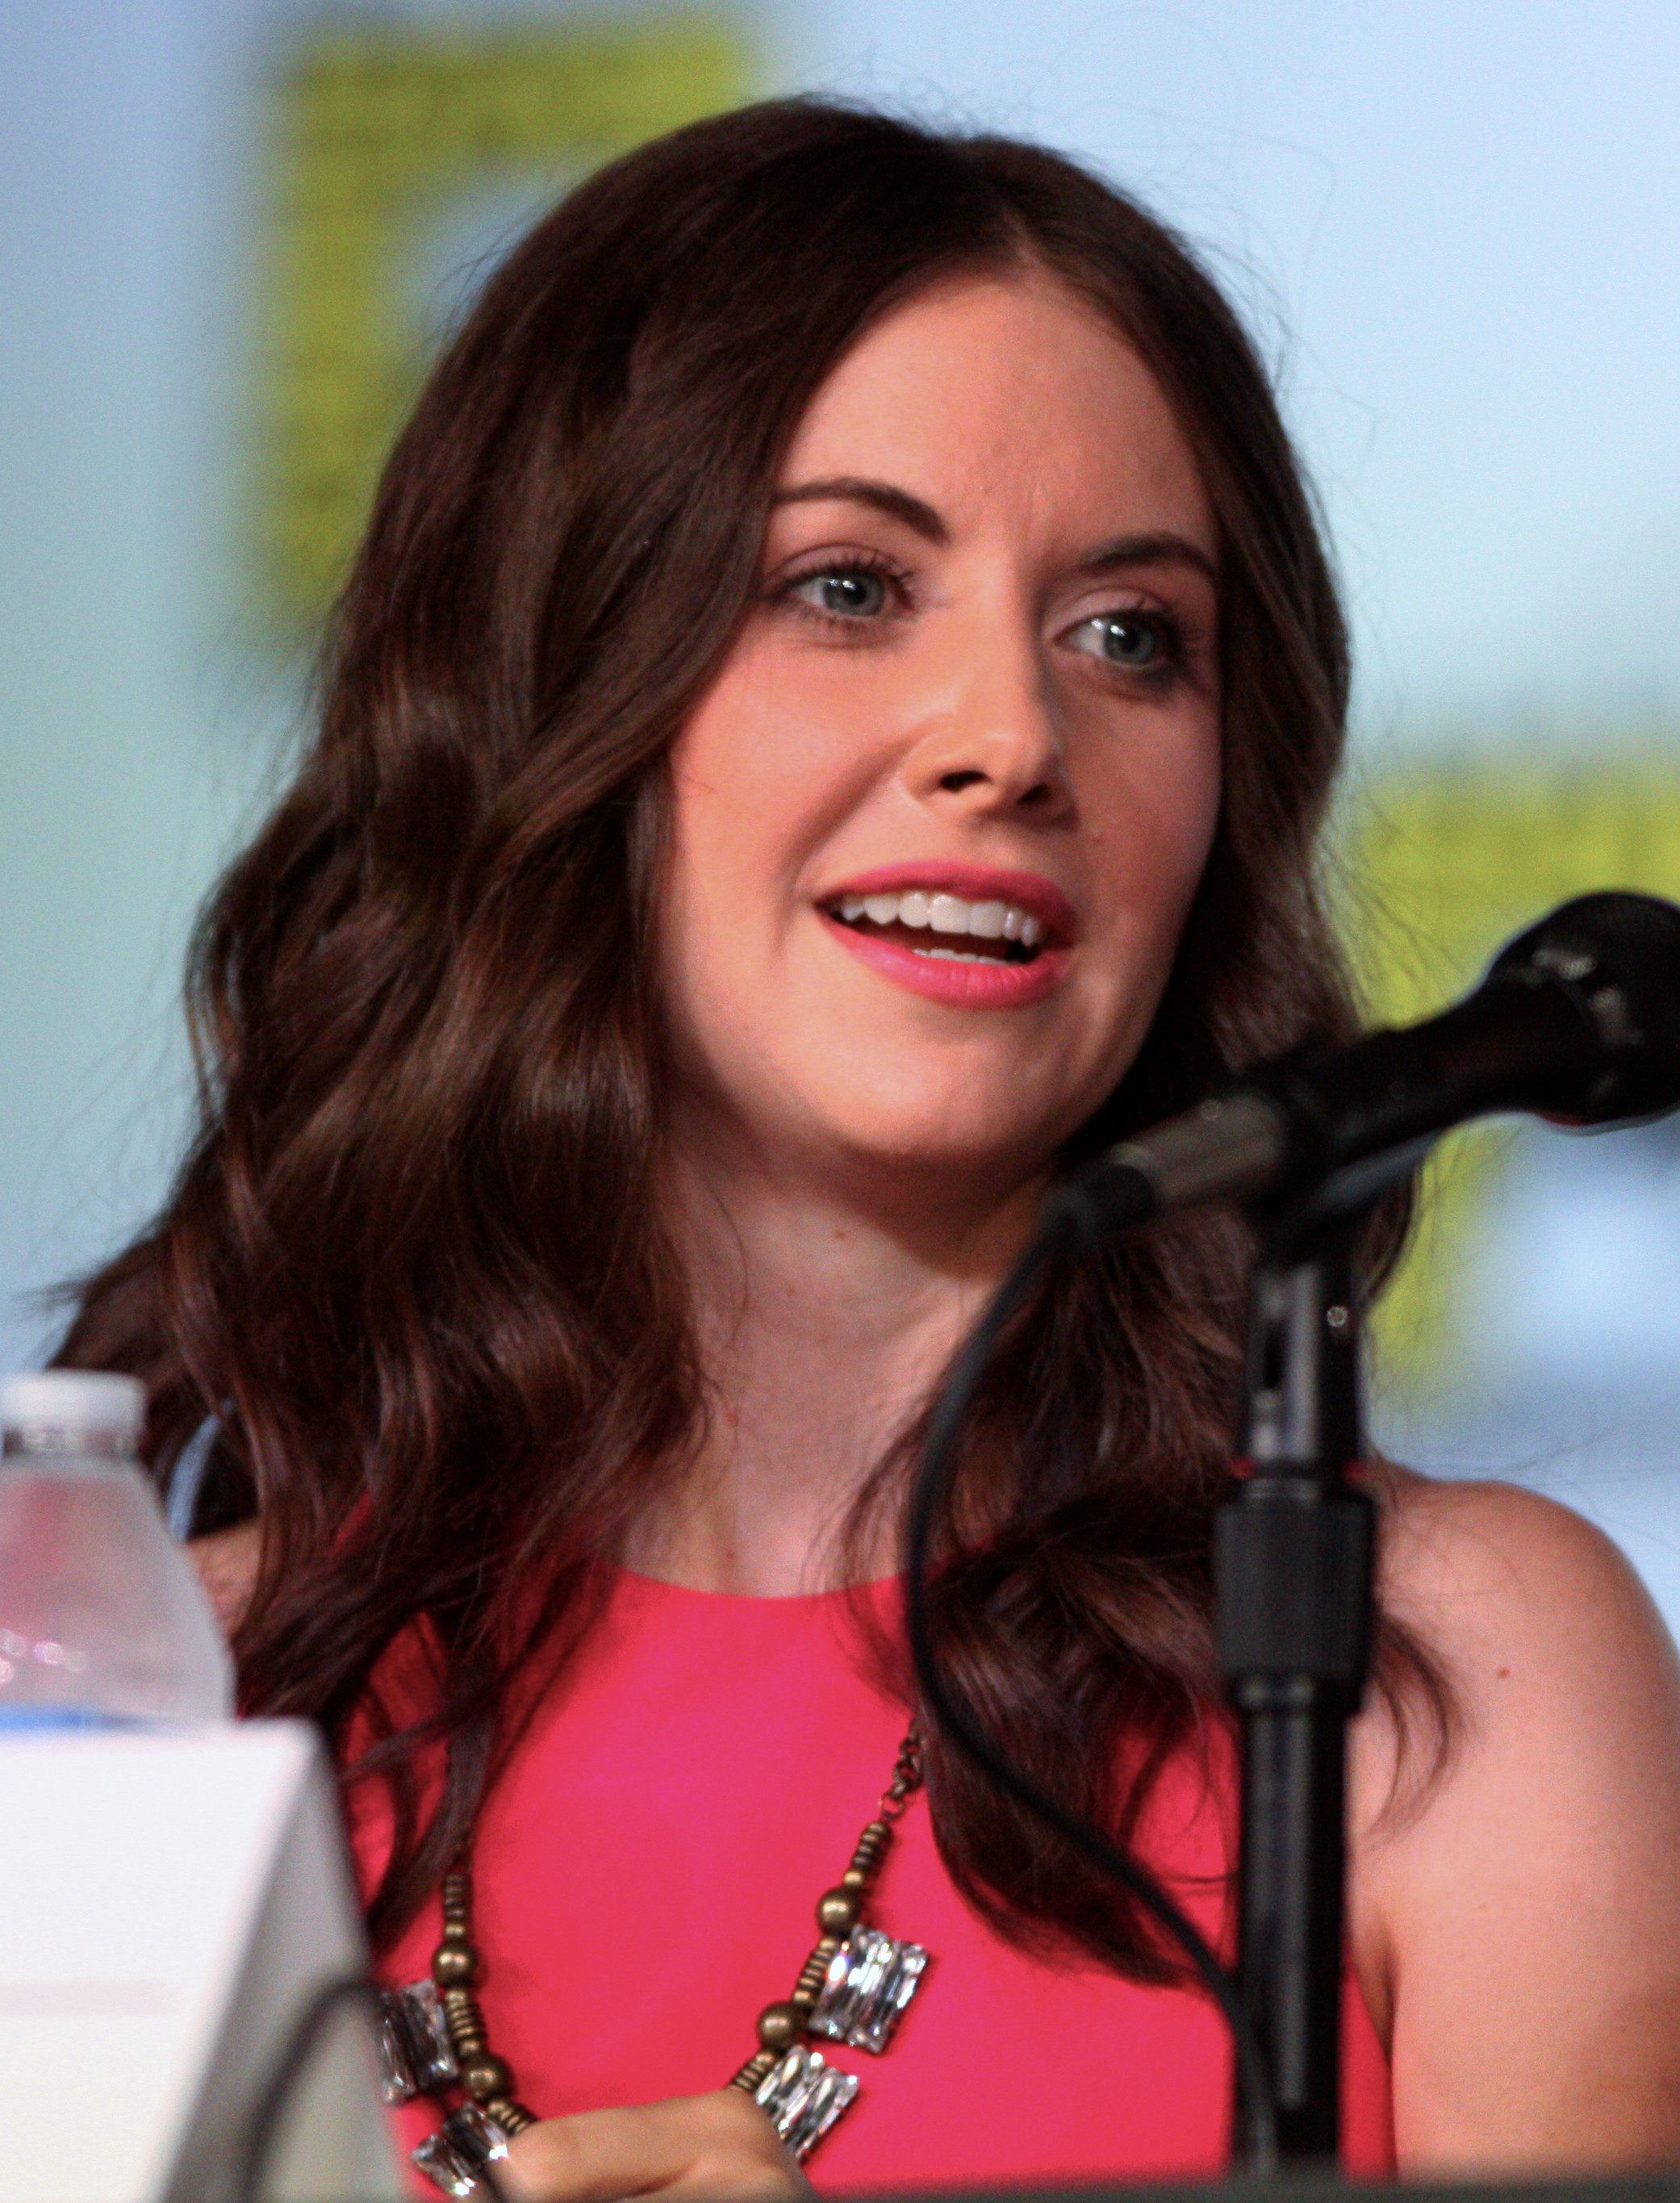 Brie at the 2012 [[San Diego Comic-Con]]